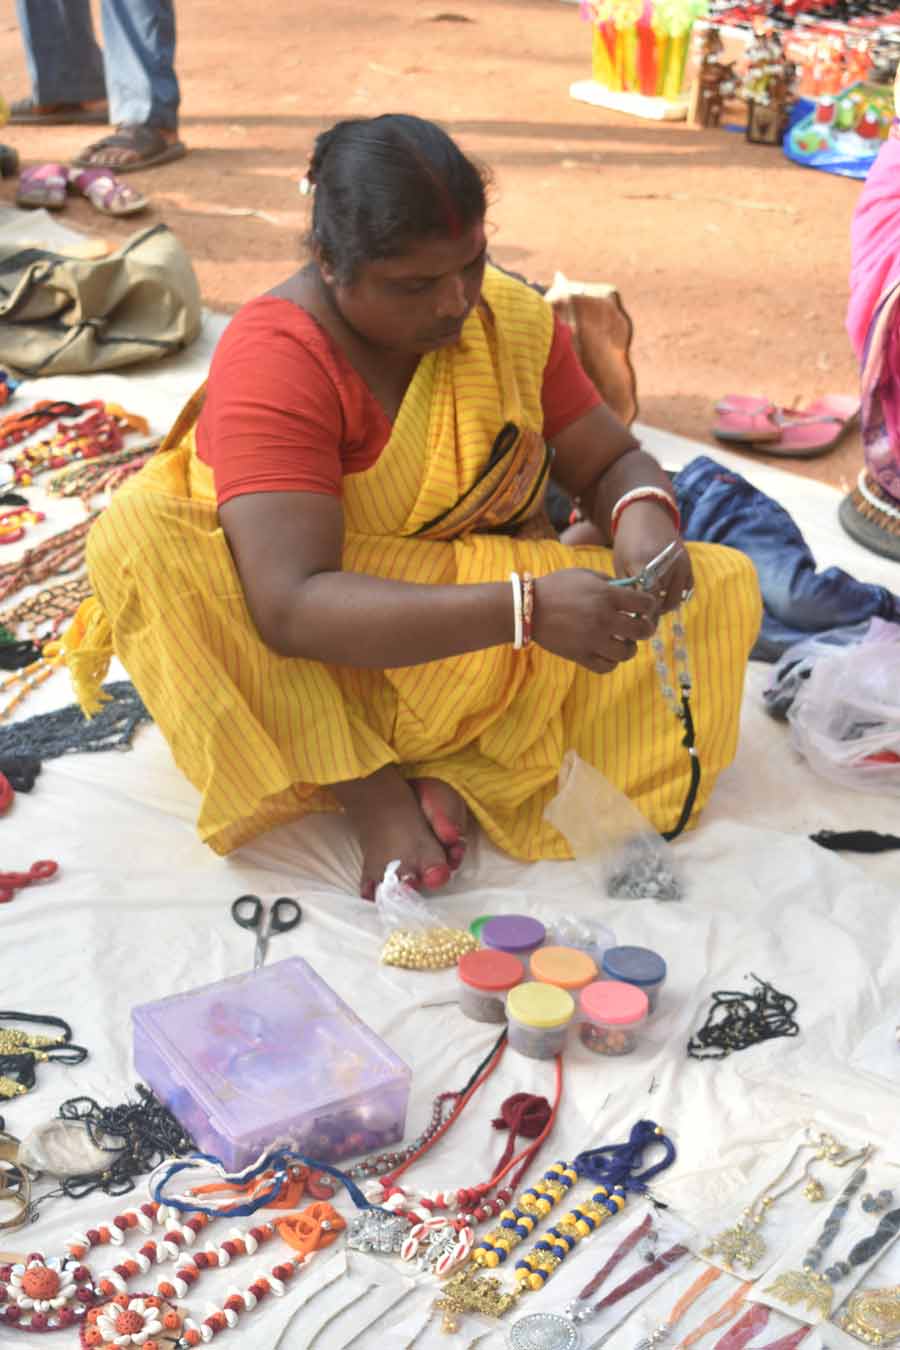 You can get customised neckpieces and earrings too from the artisans visiting the 'haat'